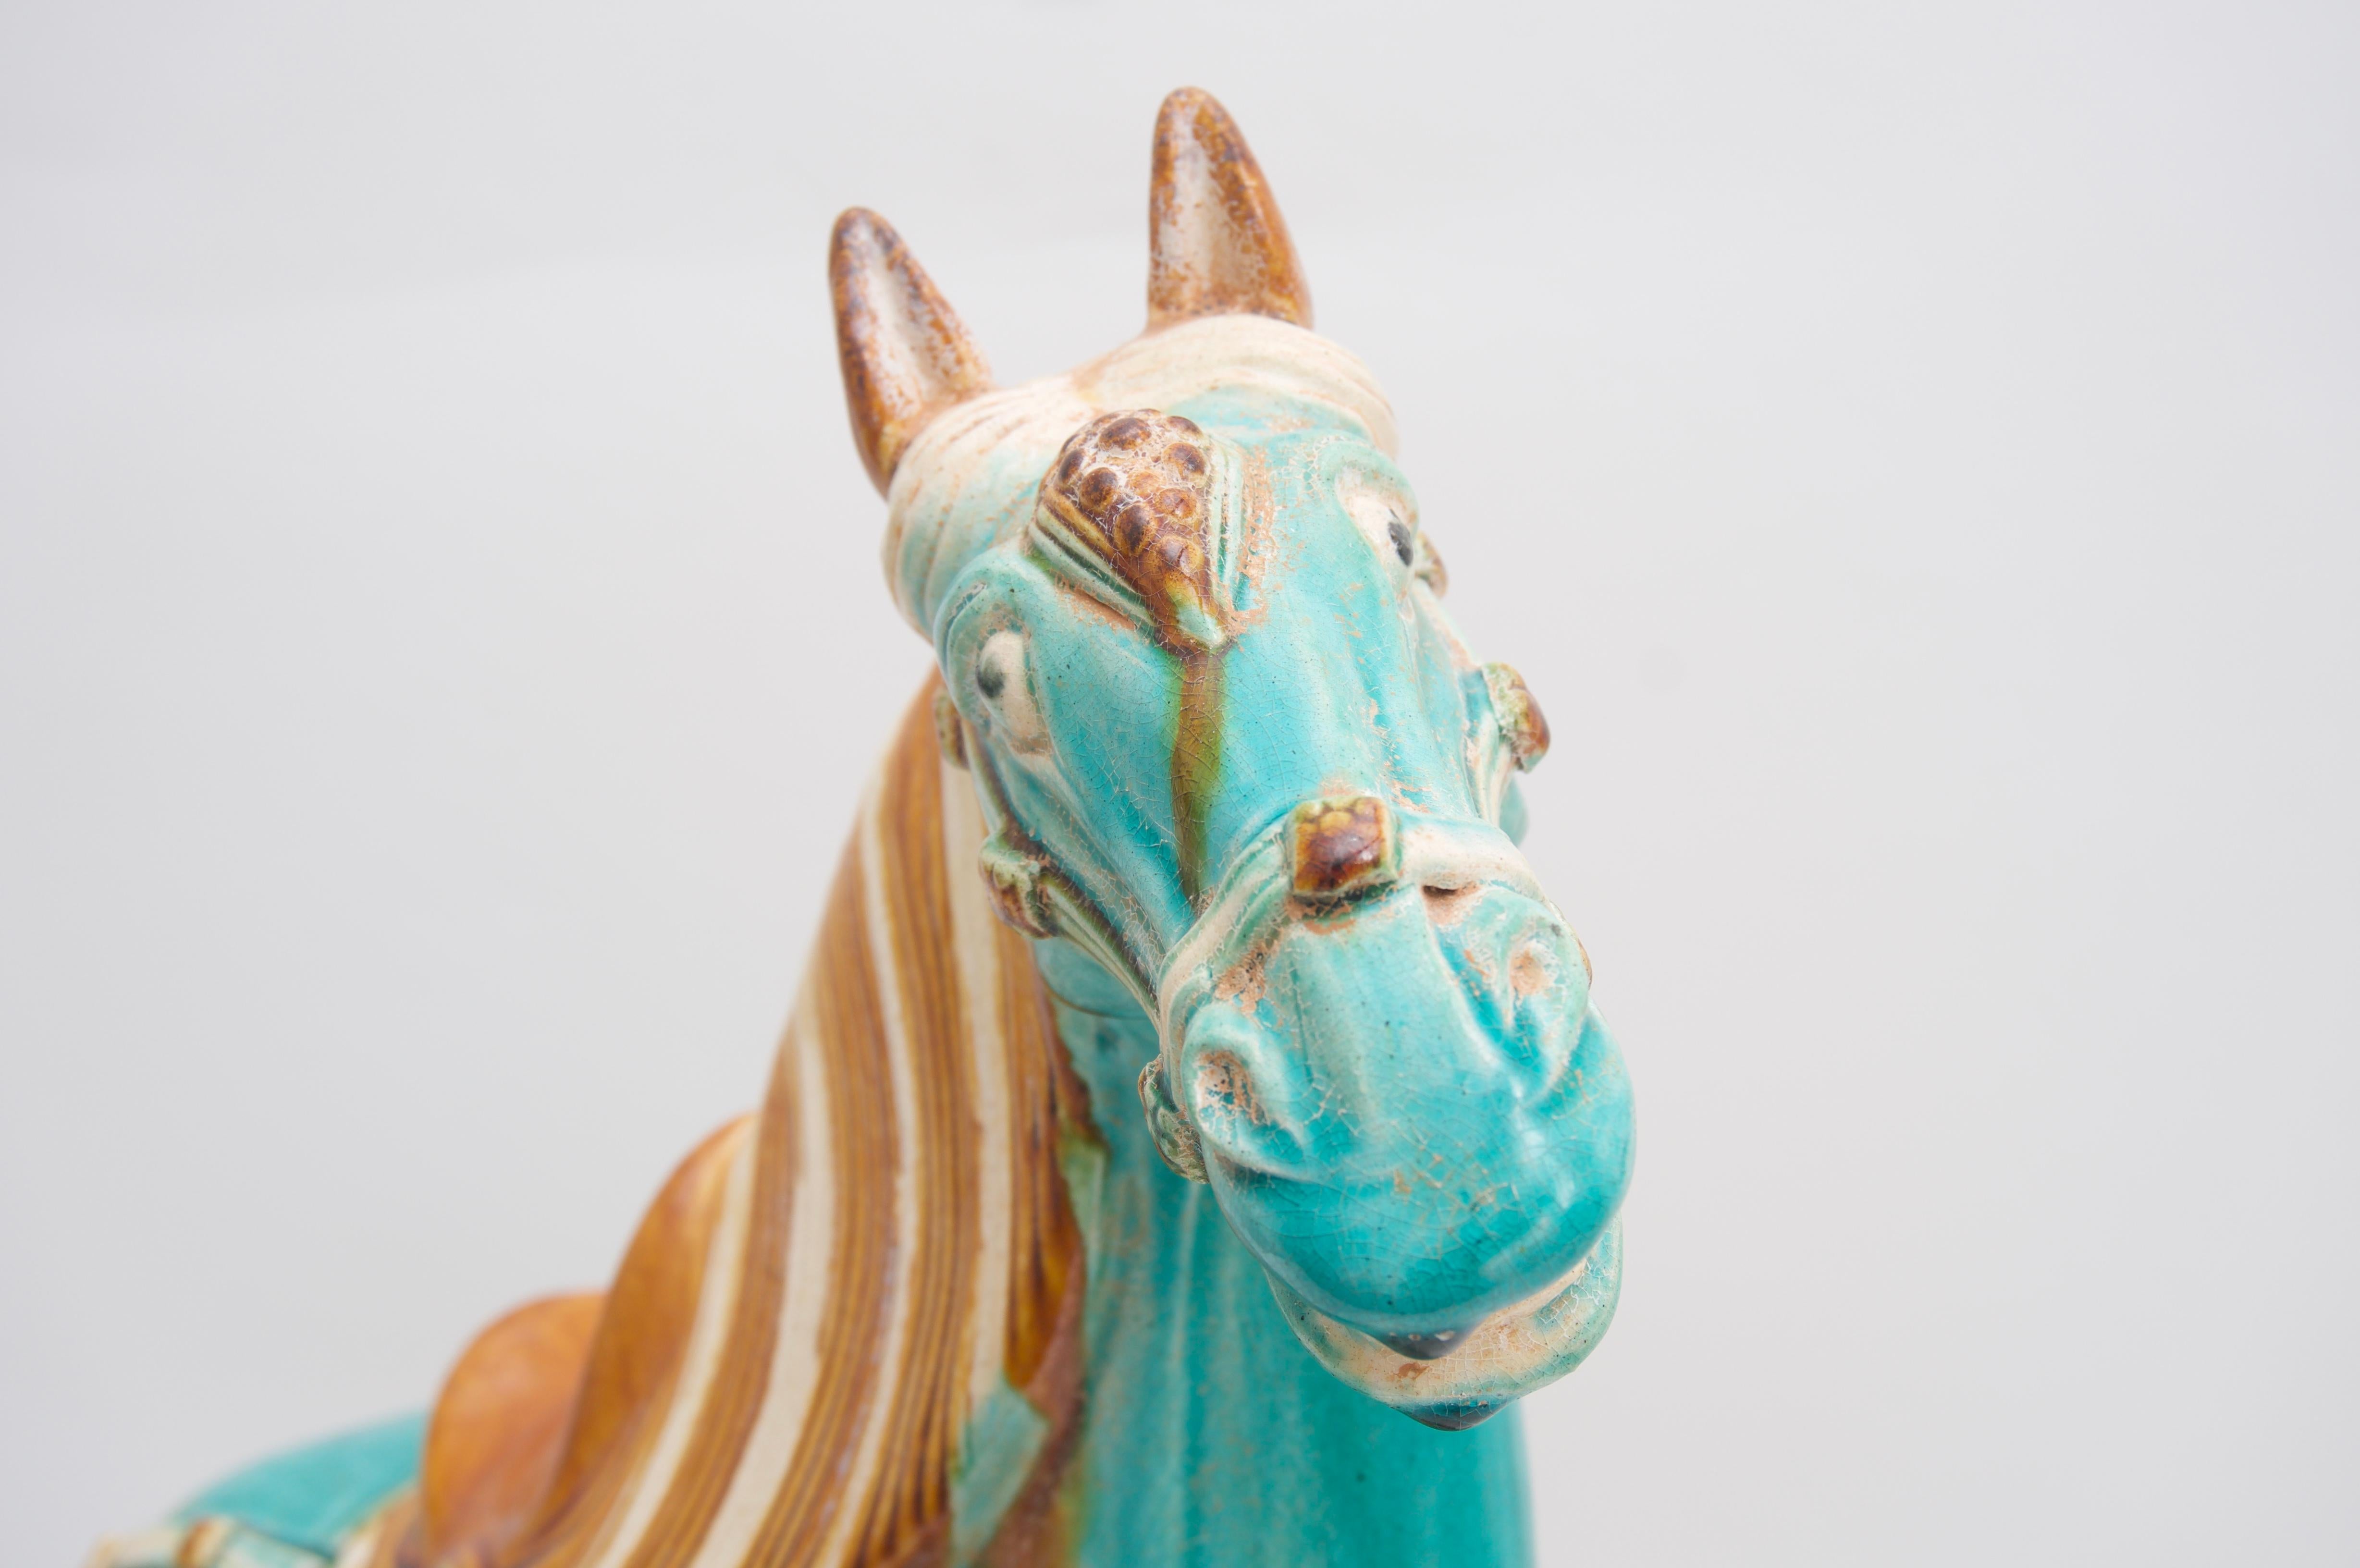 This stylish and chic Tang dynasty style figure of a horse was acquired from a Palm Beach estate and it dates to the 1970s with its Classic Palm Beach turquoise glaze.